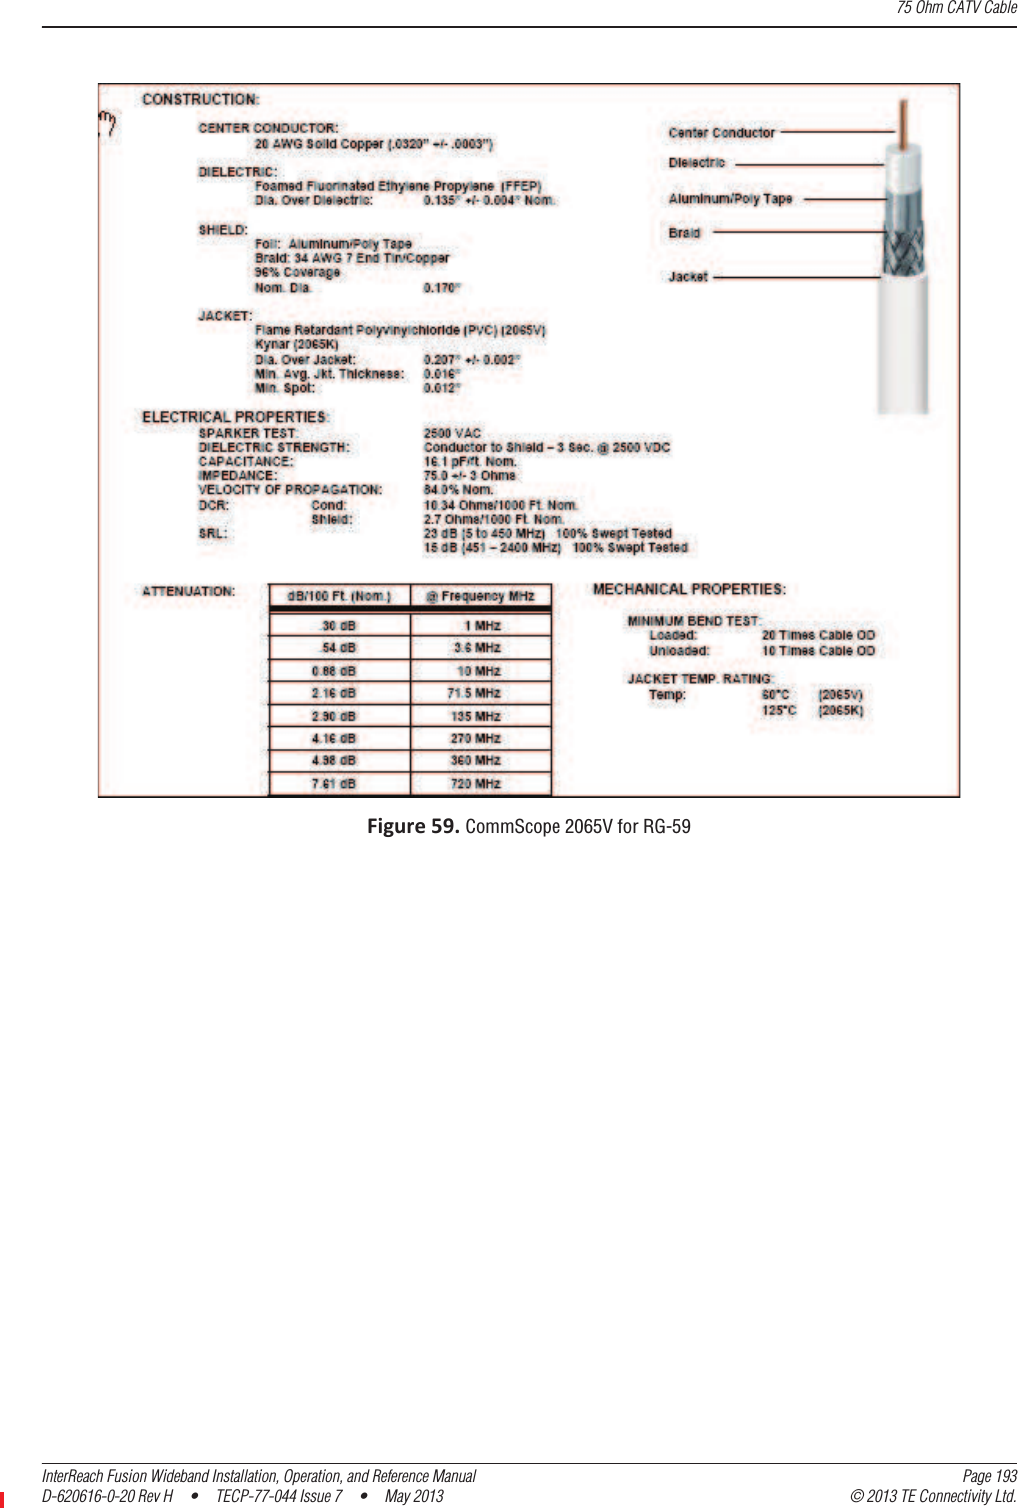 75 Ohm CATV CableInterReach Fusion Wideband Installation, Operation, and Reference Manual Page 193D-620616-0-20 Rev H  •  TECP-77-044 Issue 7  •  May 2013 © 2013 TE Connectivity Ltd.Figure59.CommScope 2065V for RG-59